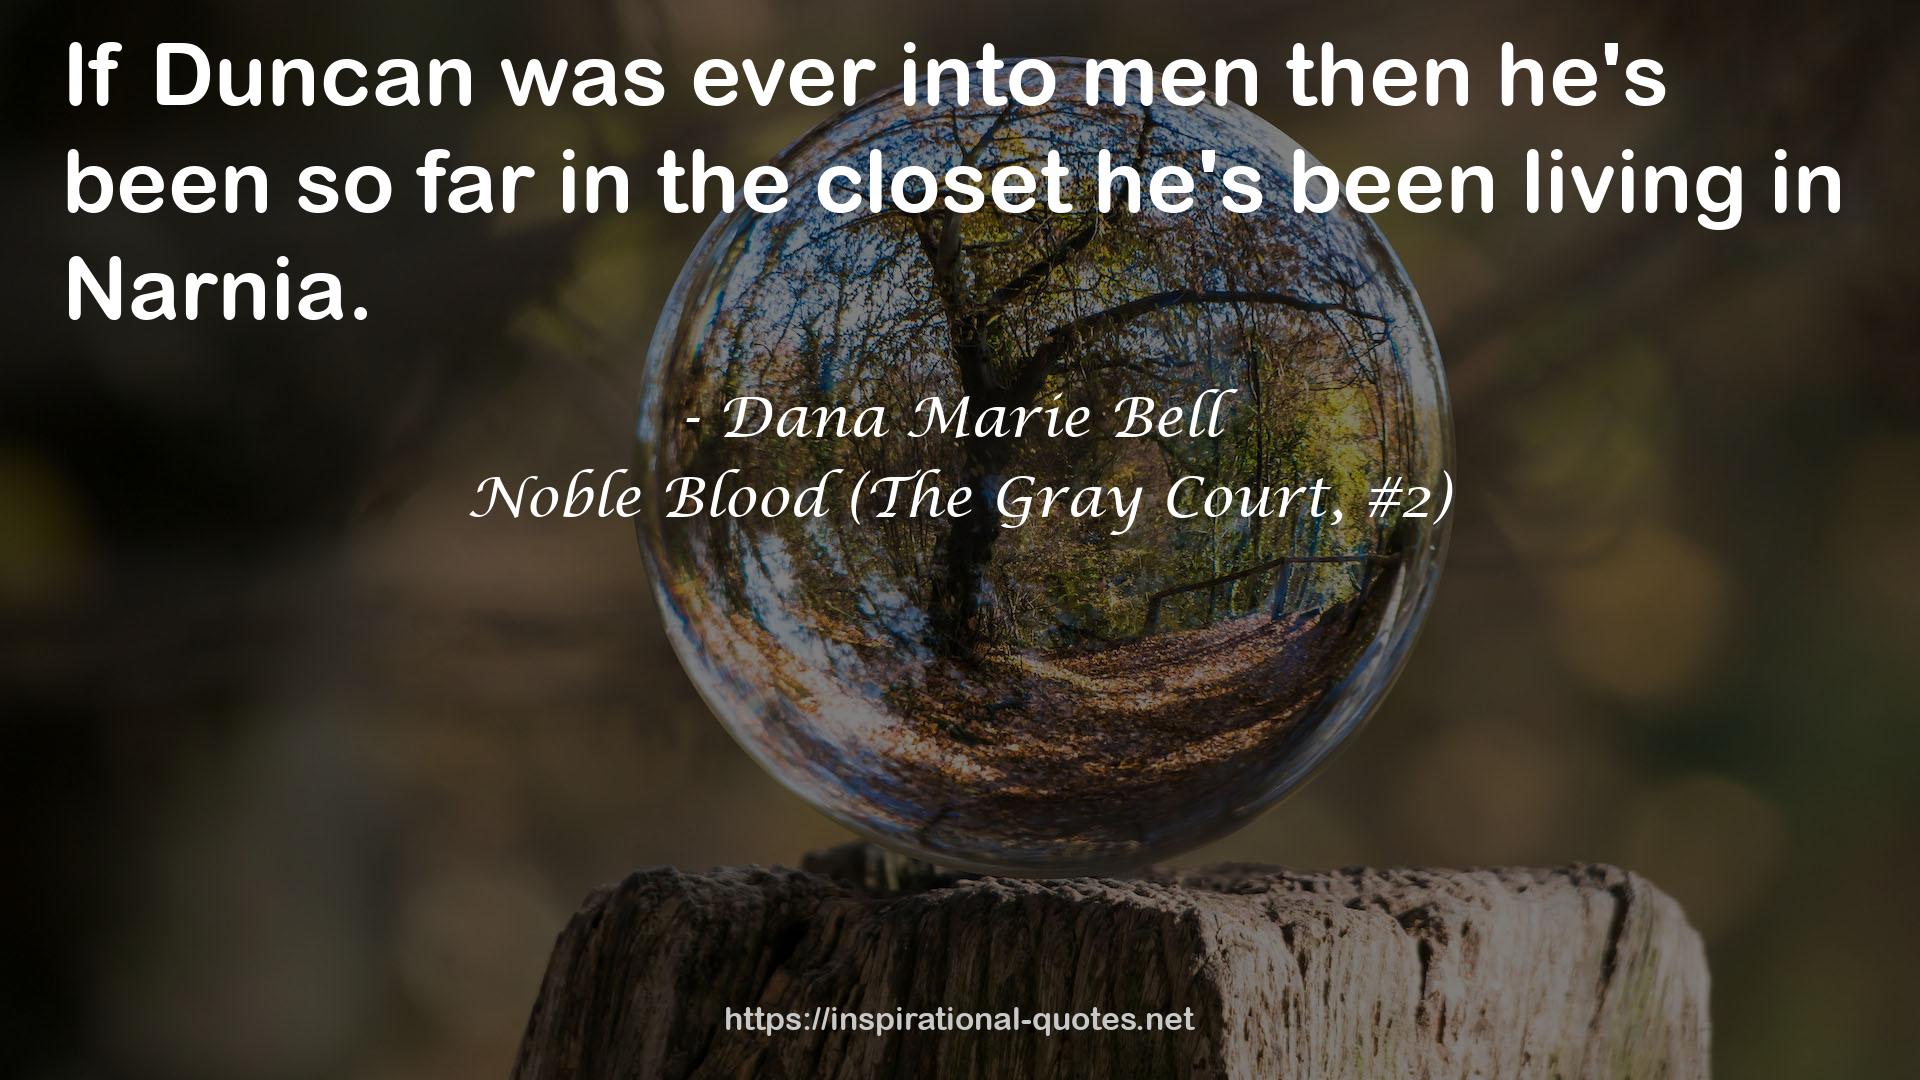 Dana Marie Bell QUOTES